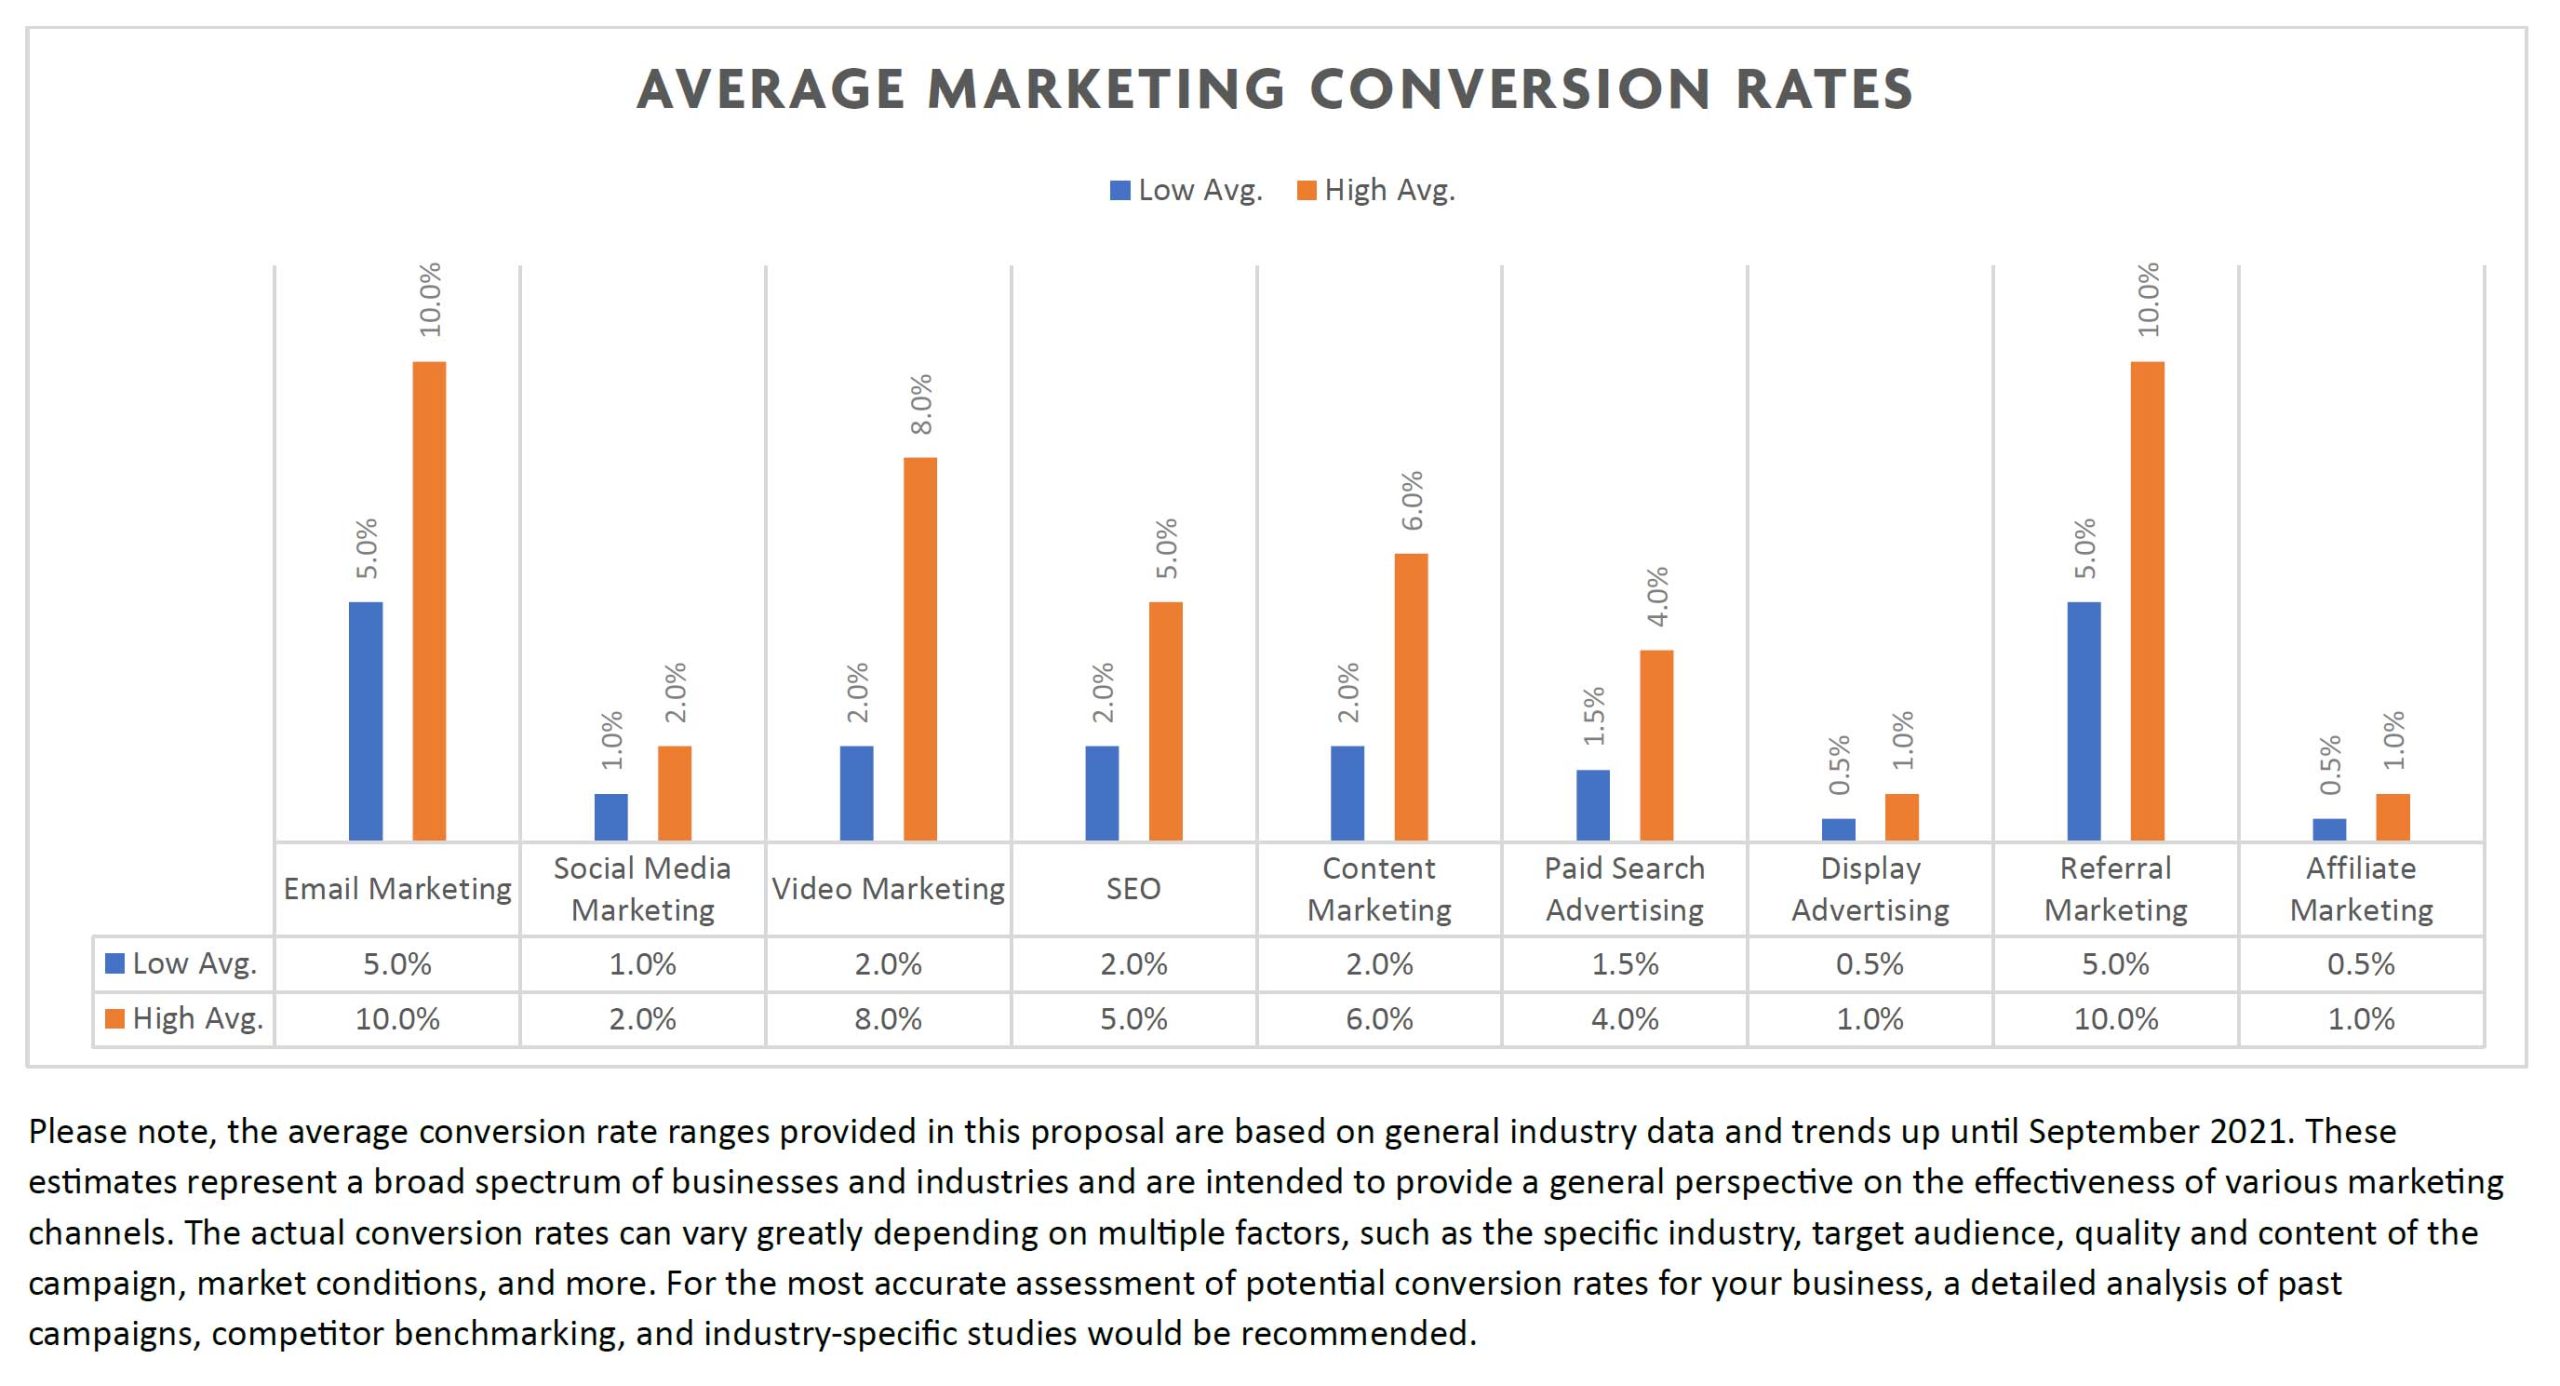 average marketing conversion rates as of 2021